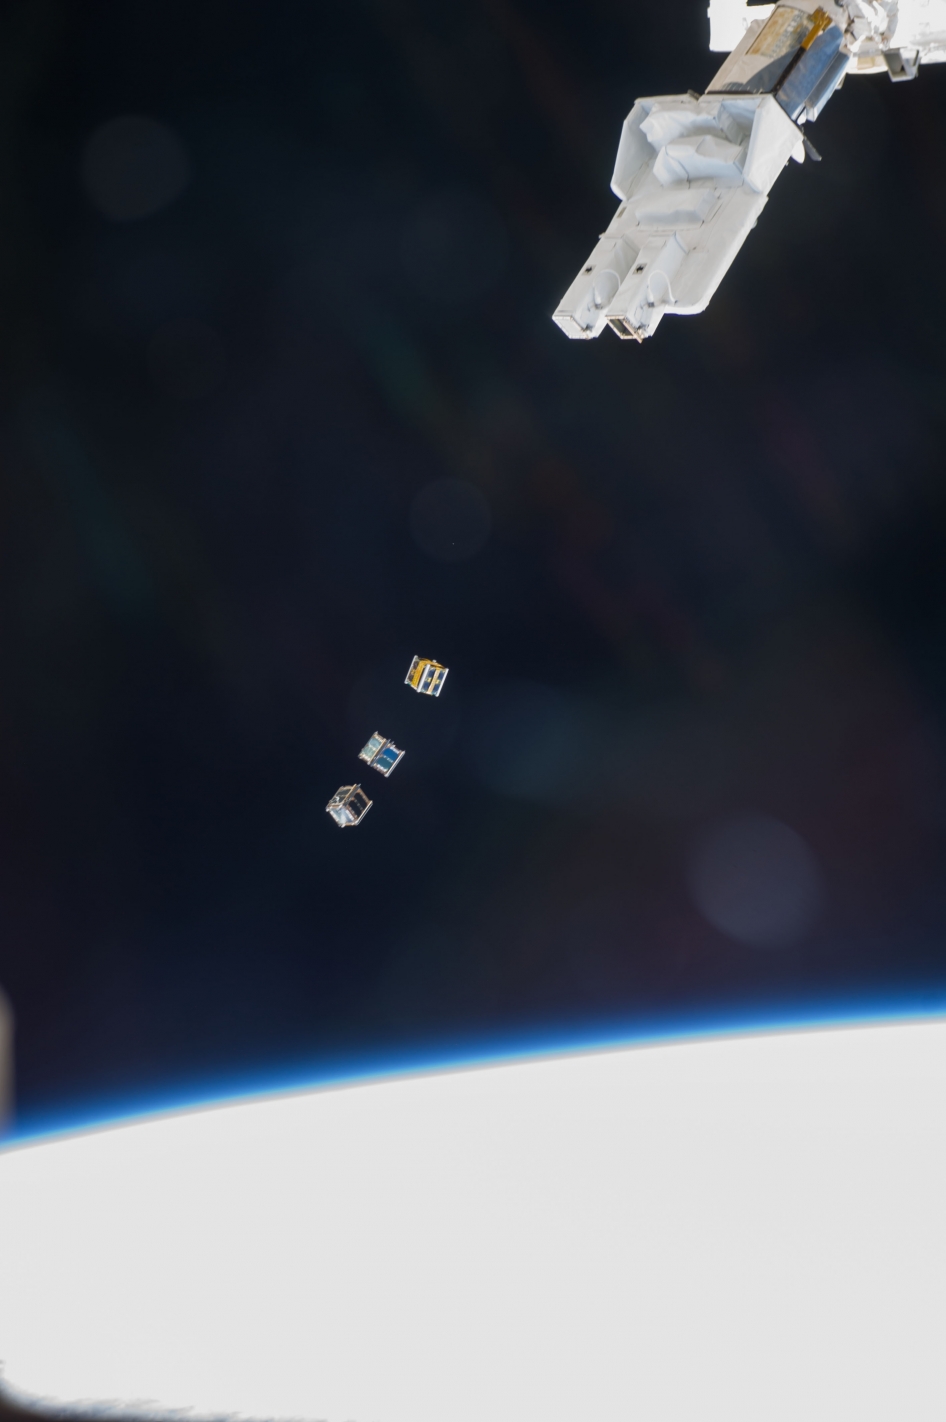 What Are These Boxes Doing Floating Through Space?